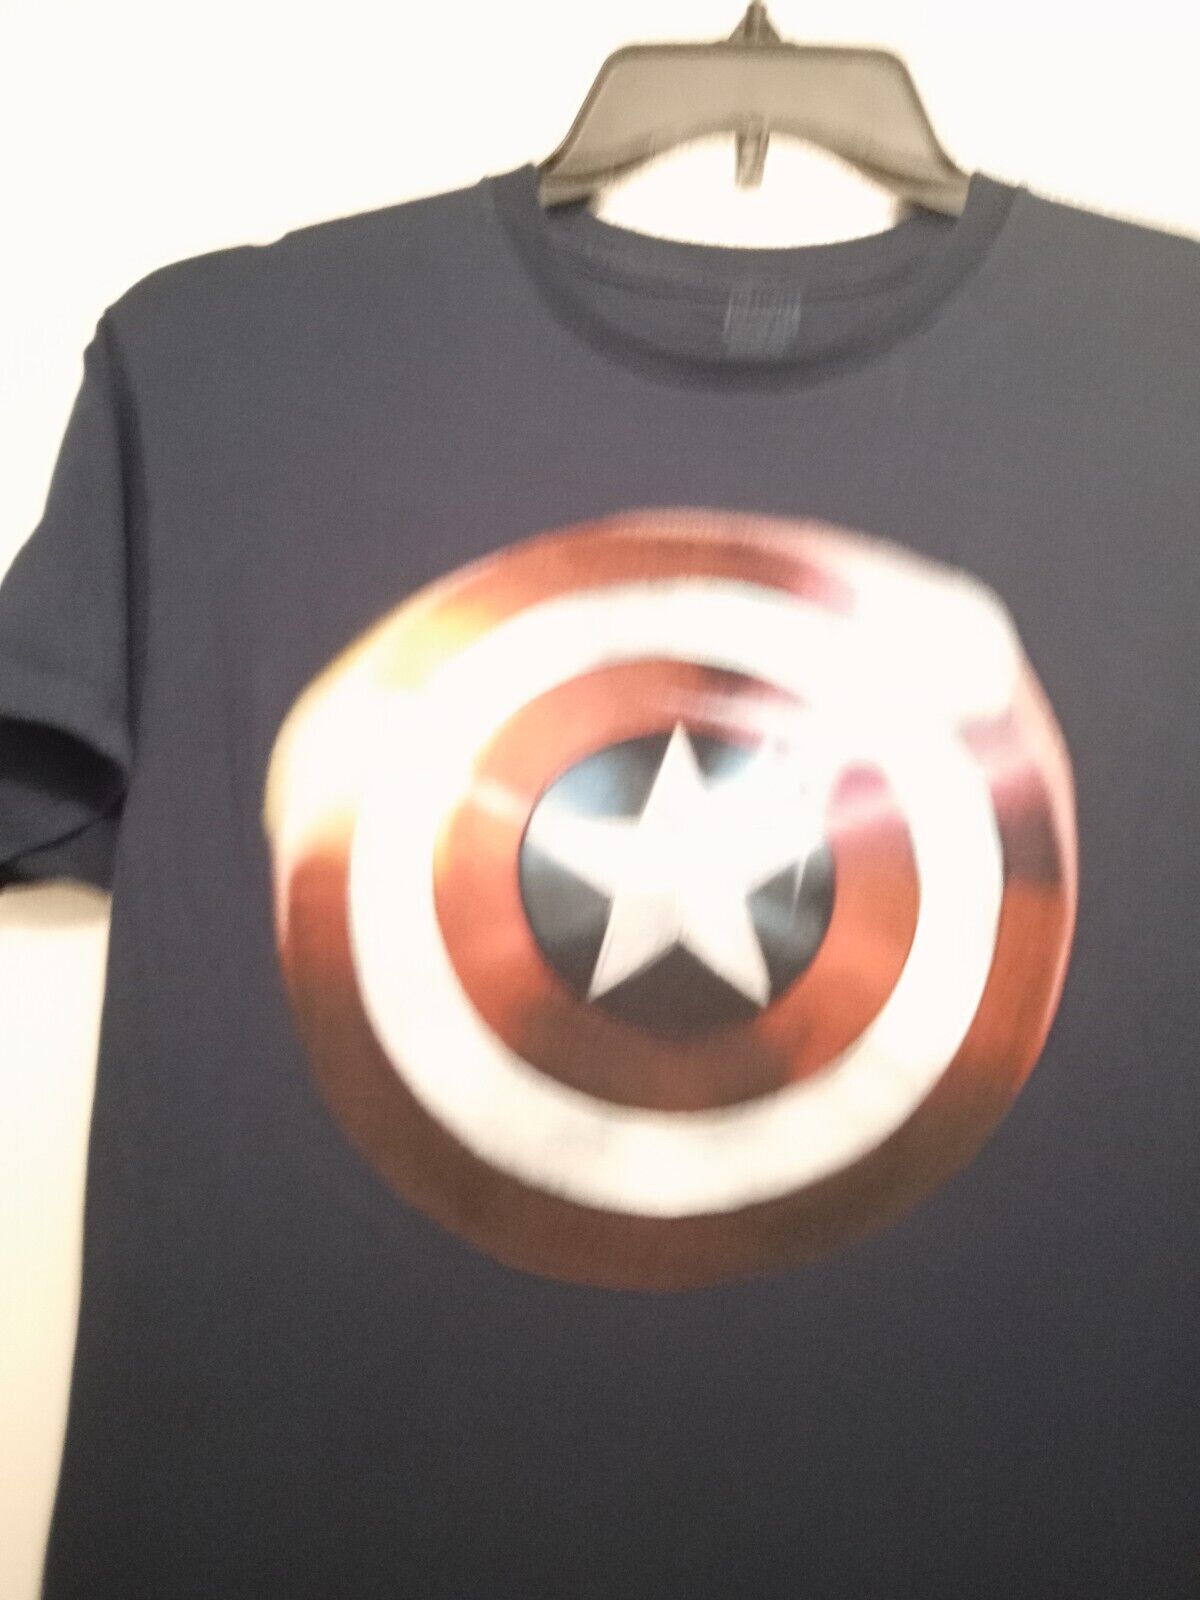 Marvel  T-shirt Very Cool.